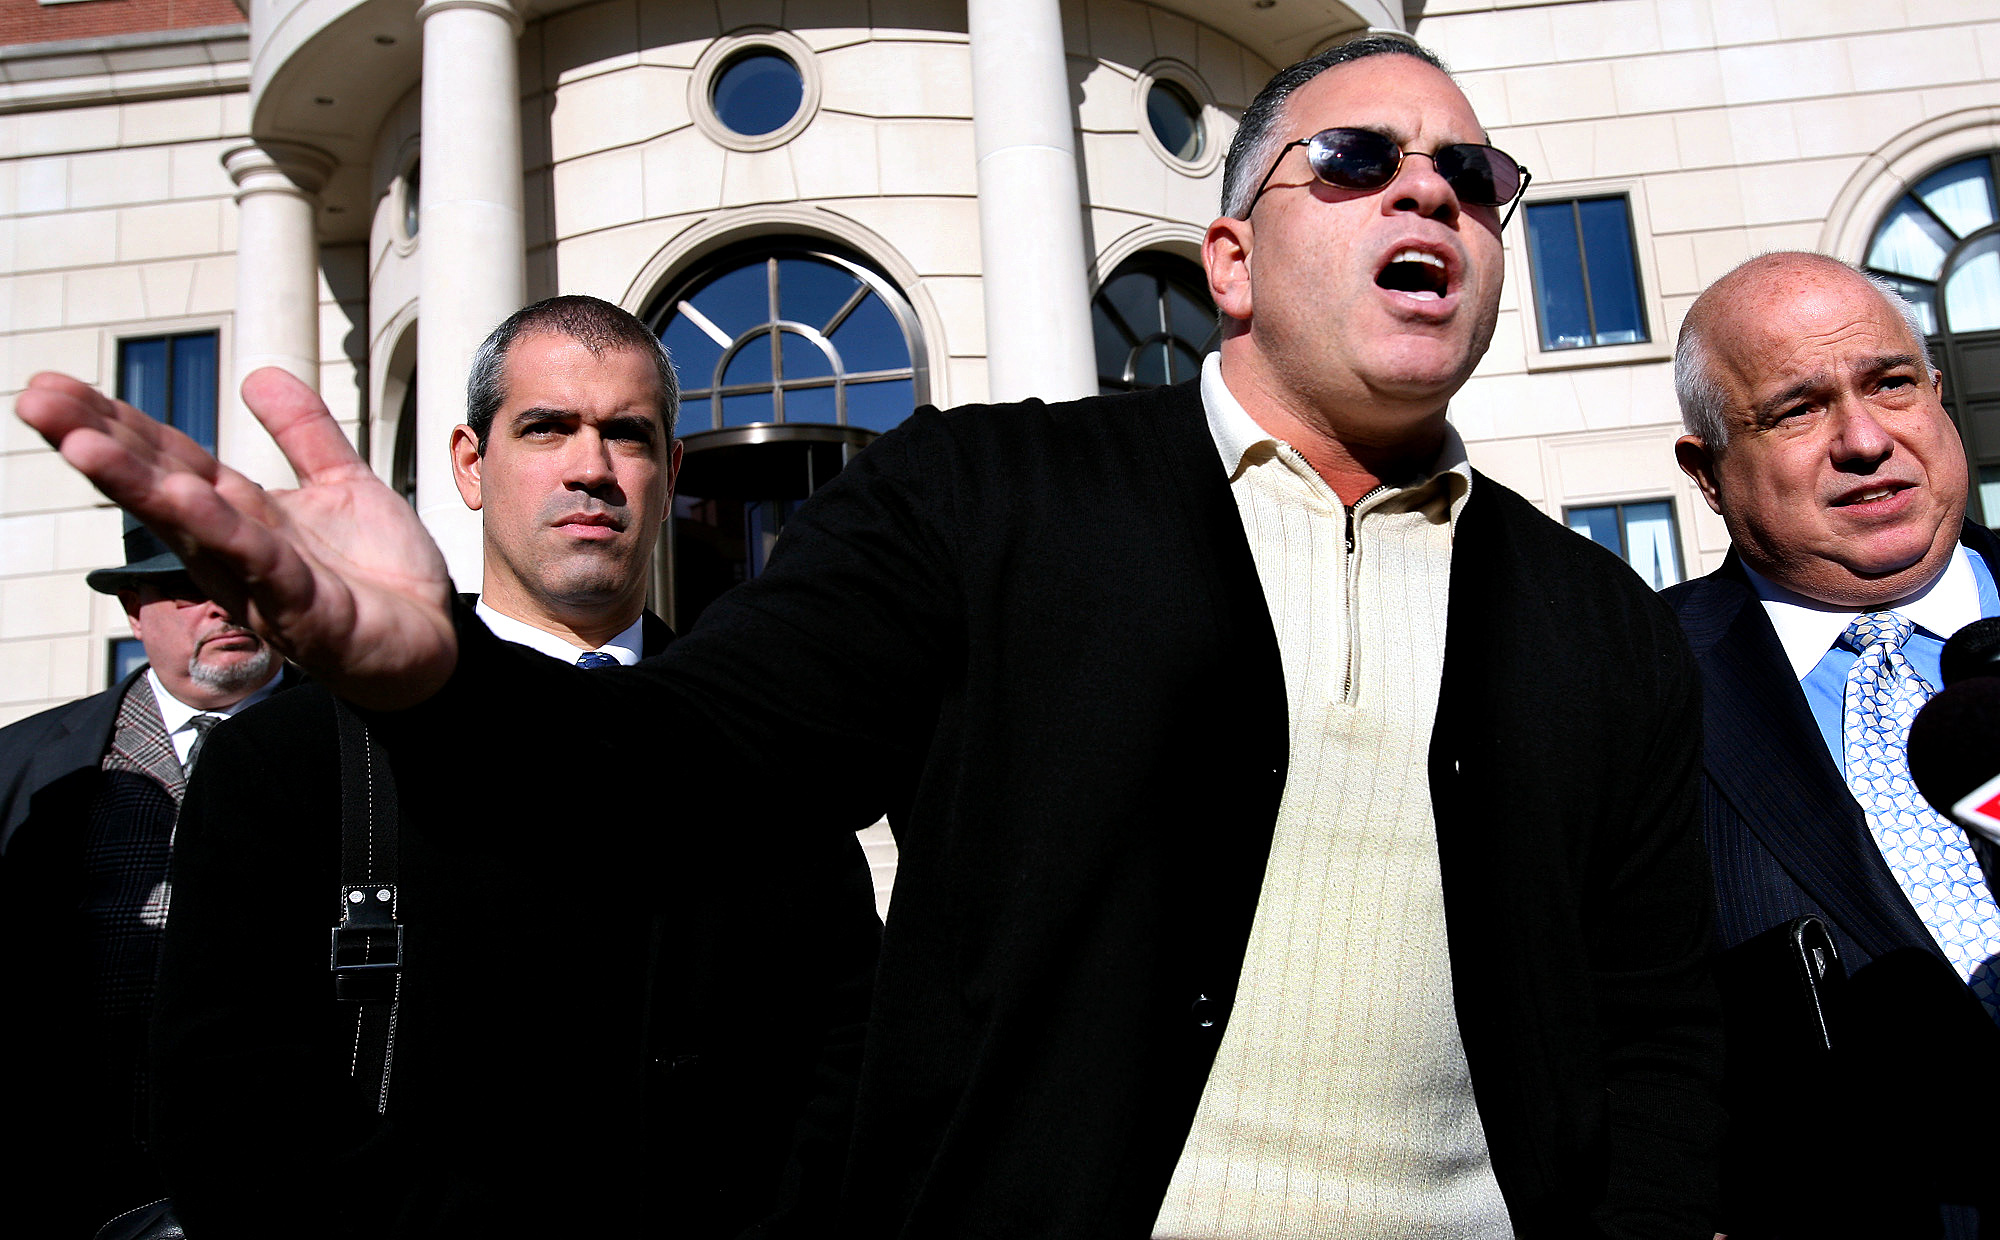 PHOTO: John A. "Junior" Gotti, center, son of the late Gambino family crime boss, speaks after a hearing on his tax payment status outside the Federal Court House in White Plains, N.Y., Nov. 27, 2007.